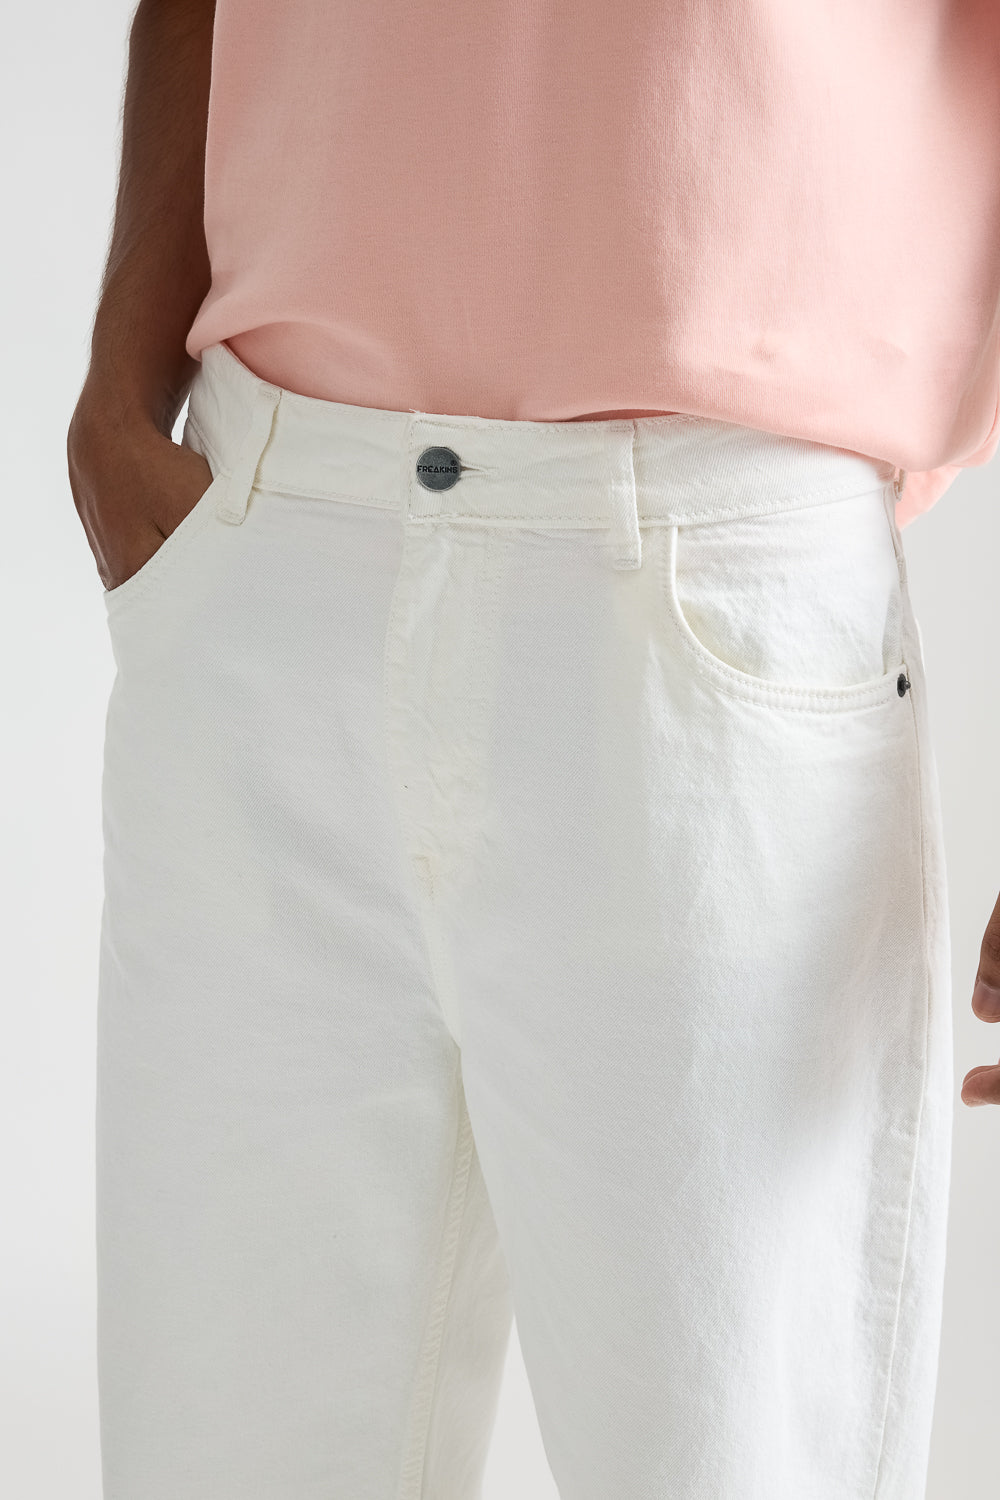 ICONIC WHITE WIDE LEG MENS JEANS